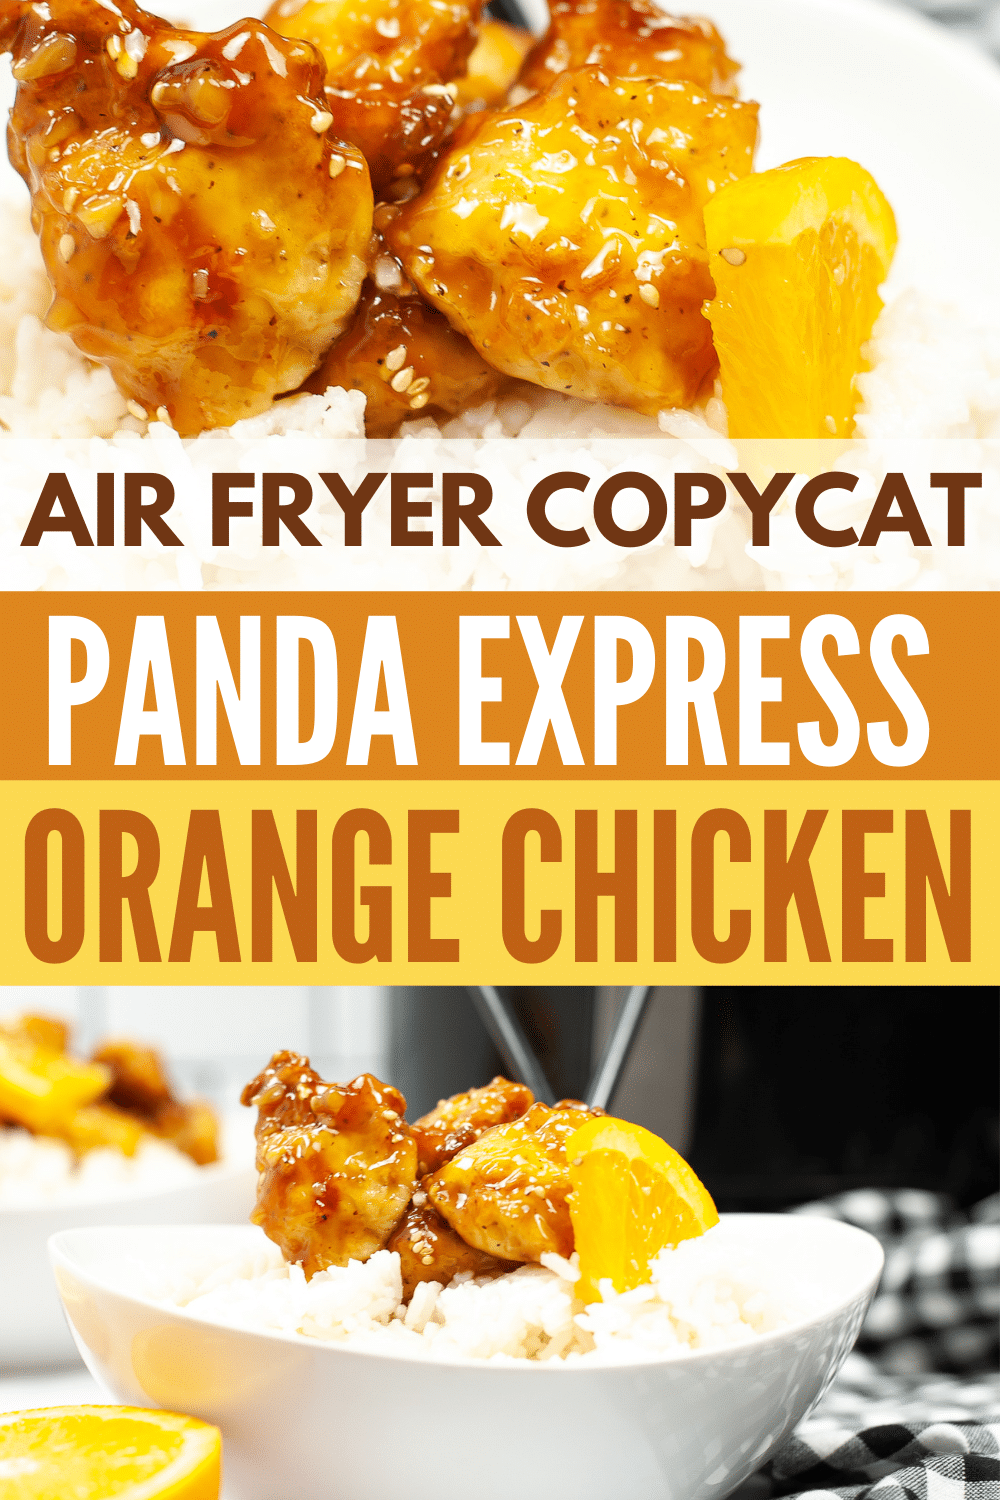 Skip the takeout and make this air fryer copycat Panda Express orange chicken at home instead. It's crispy chicken coated in a tangy sauce. #airfryer #pandaexrpress #orangechicken #copycatrecipe via @wondermomwannab